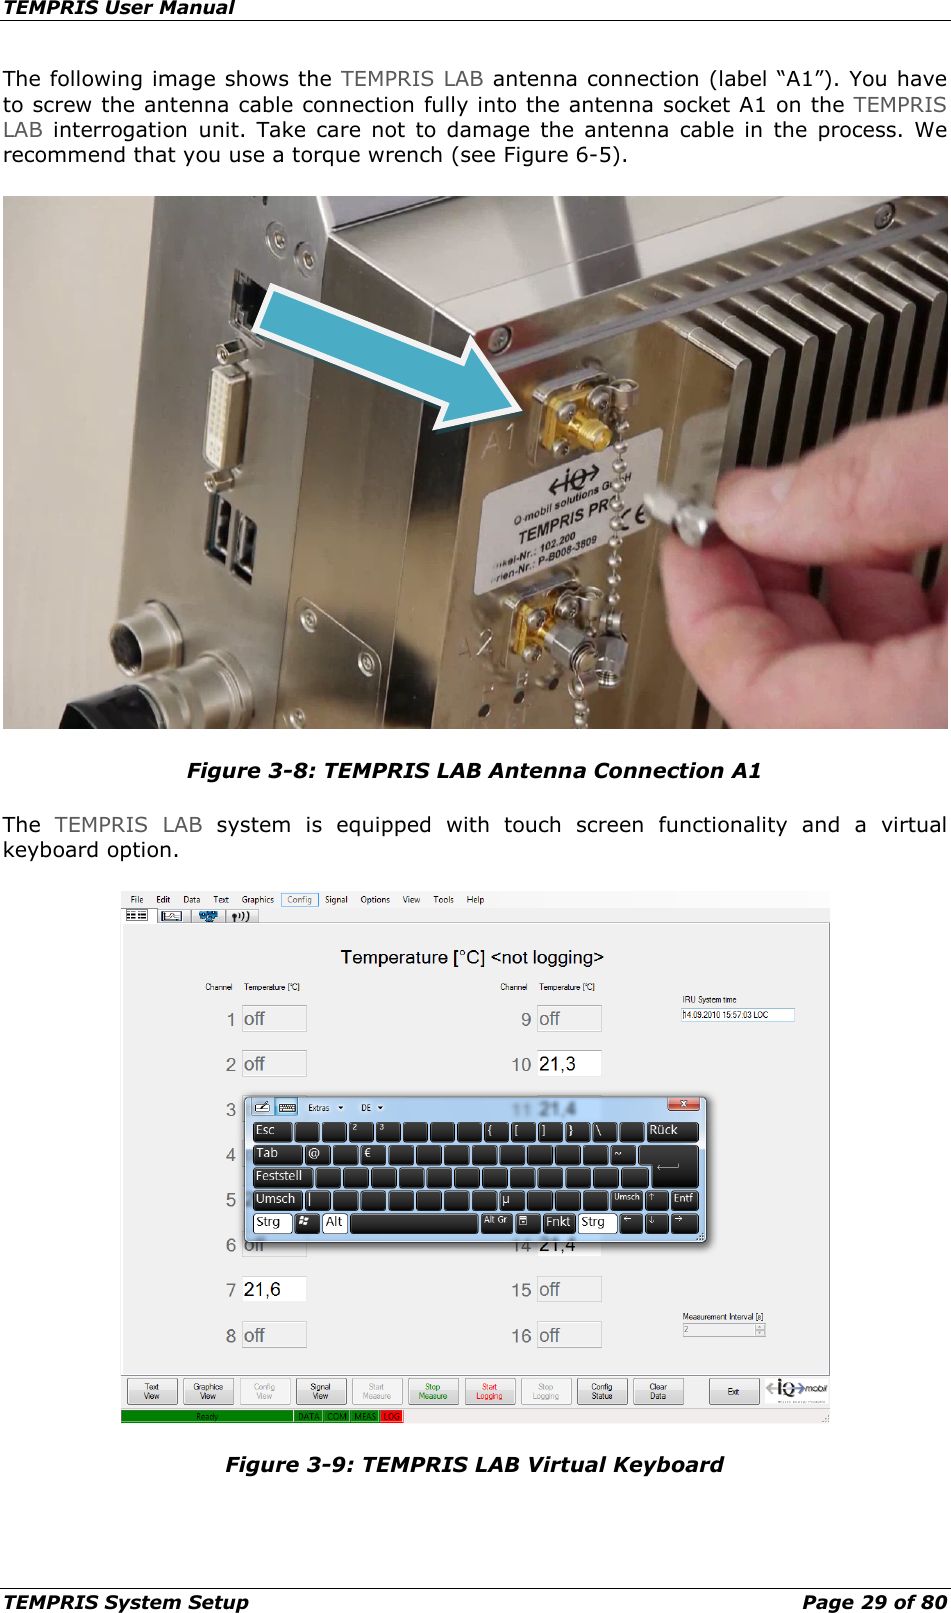 TEMPRIS User Manual TEMPRIS System Setup    Page 29 of 80 The following image shows the TEMPRIS LAB antenna connection (label “A1”). You have to screw the antenna cable connection fully into the antenna socket A1 on the TEMPRIS LAB interrogation unit. Take care not to damage the antenna cable in the process. We recommend that you use a torque wrench (see Figure 6-5).  Figure 3-8: TEMPRIS LAB Antenna Connection A1 The  TEMPRIS LAB system  is equipped with touch screen functionality and a virtual keyboard option.  Figure 3-9: TEMPRIS LAB Virtual Keyboard  